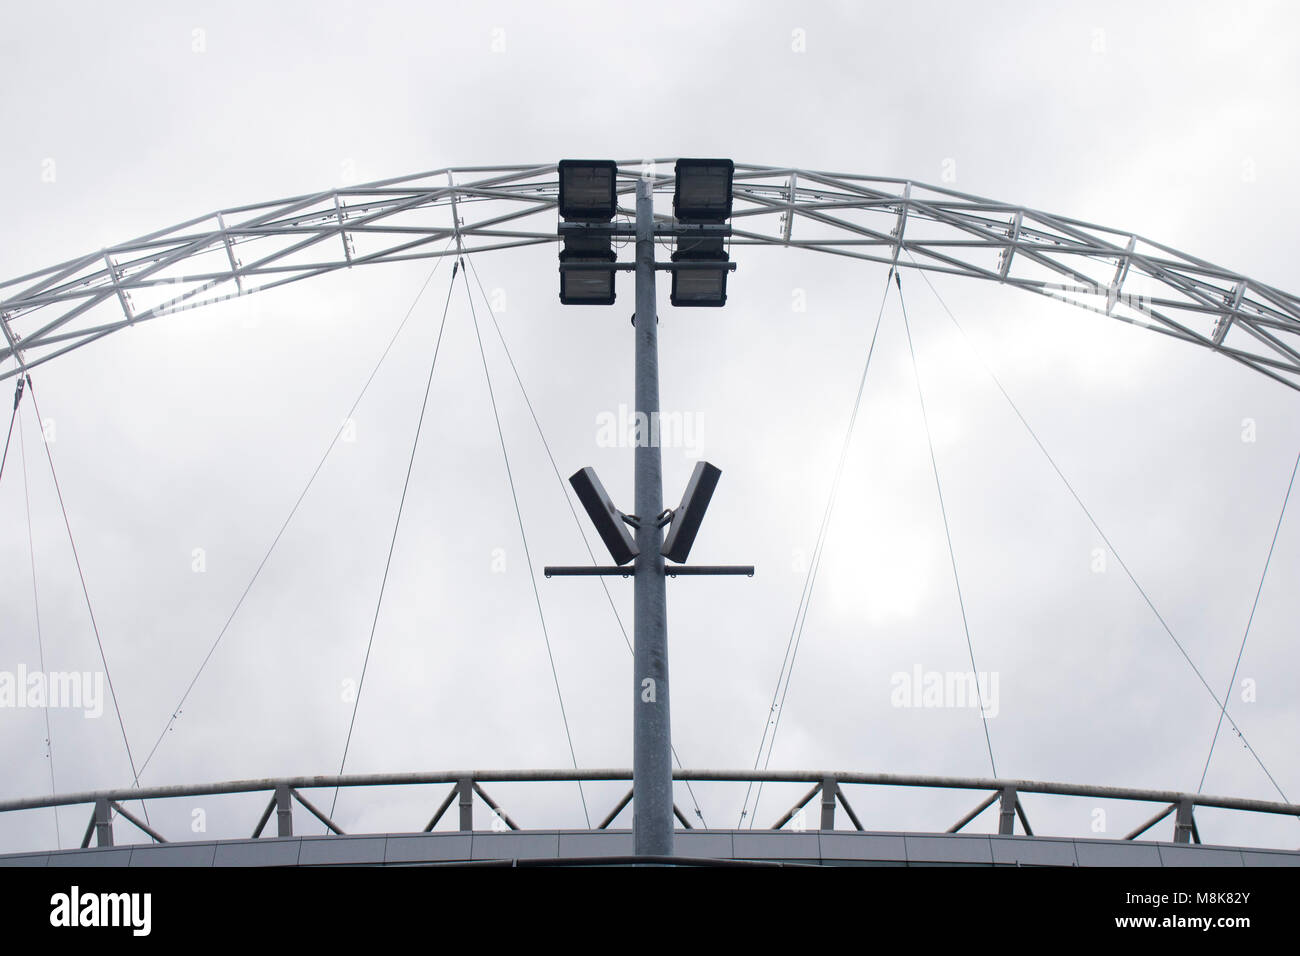 Wembley event sport stadium arch in london with lights Stock Photo